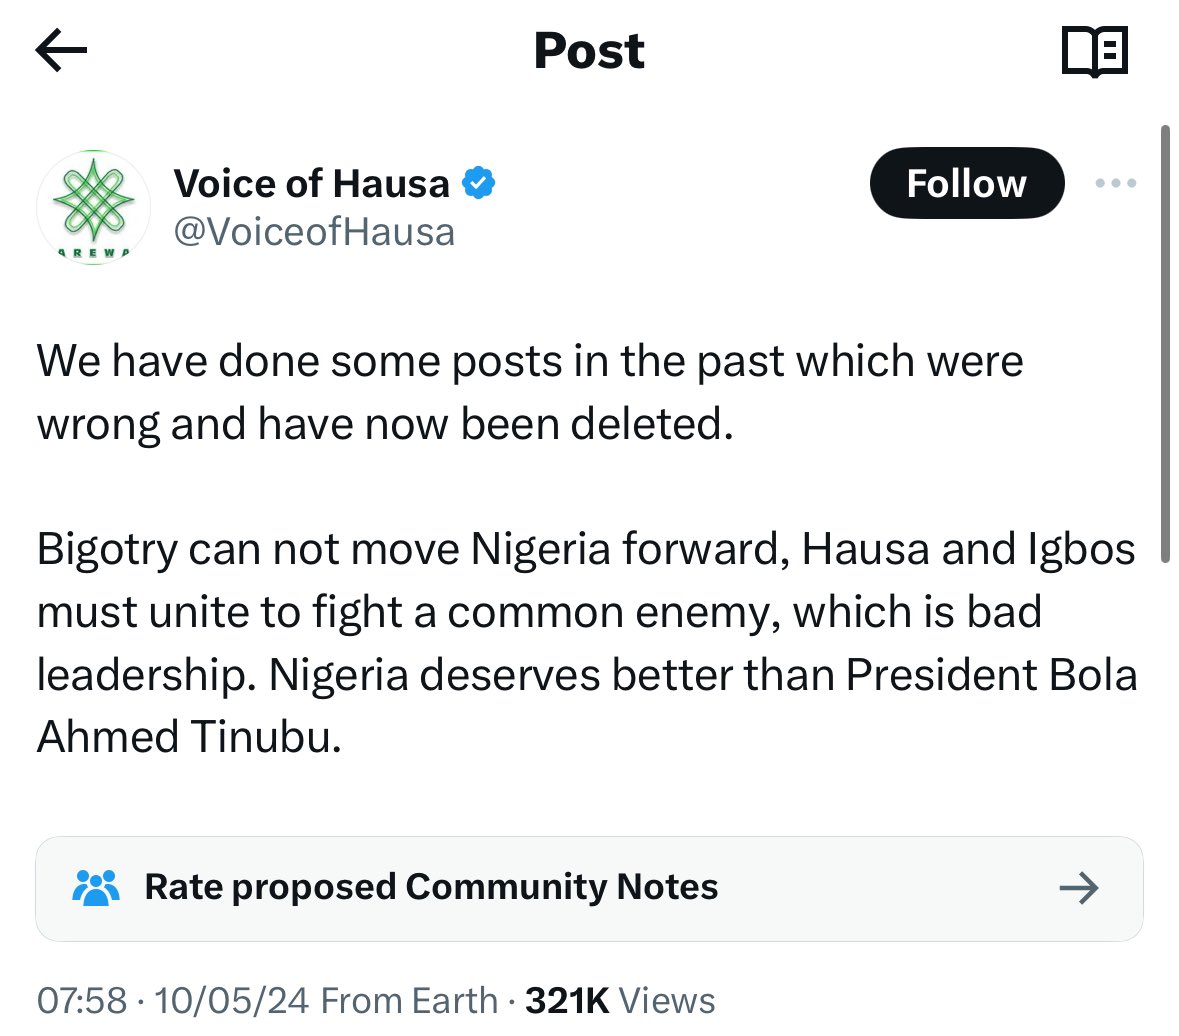 Igbos and Hausas must unite to fight a common enemy? In the WAZOBIA mathematics, the common enemy becomes the Yoruba, according to you. Hehehehe 🤣

Sounds like same shite y’all did and decided to fight “the common enemy” from 1967 to 1970.

Fvck that shhit bro, the common enemy…